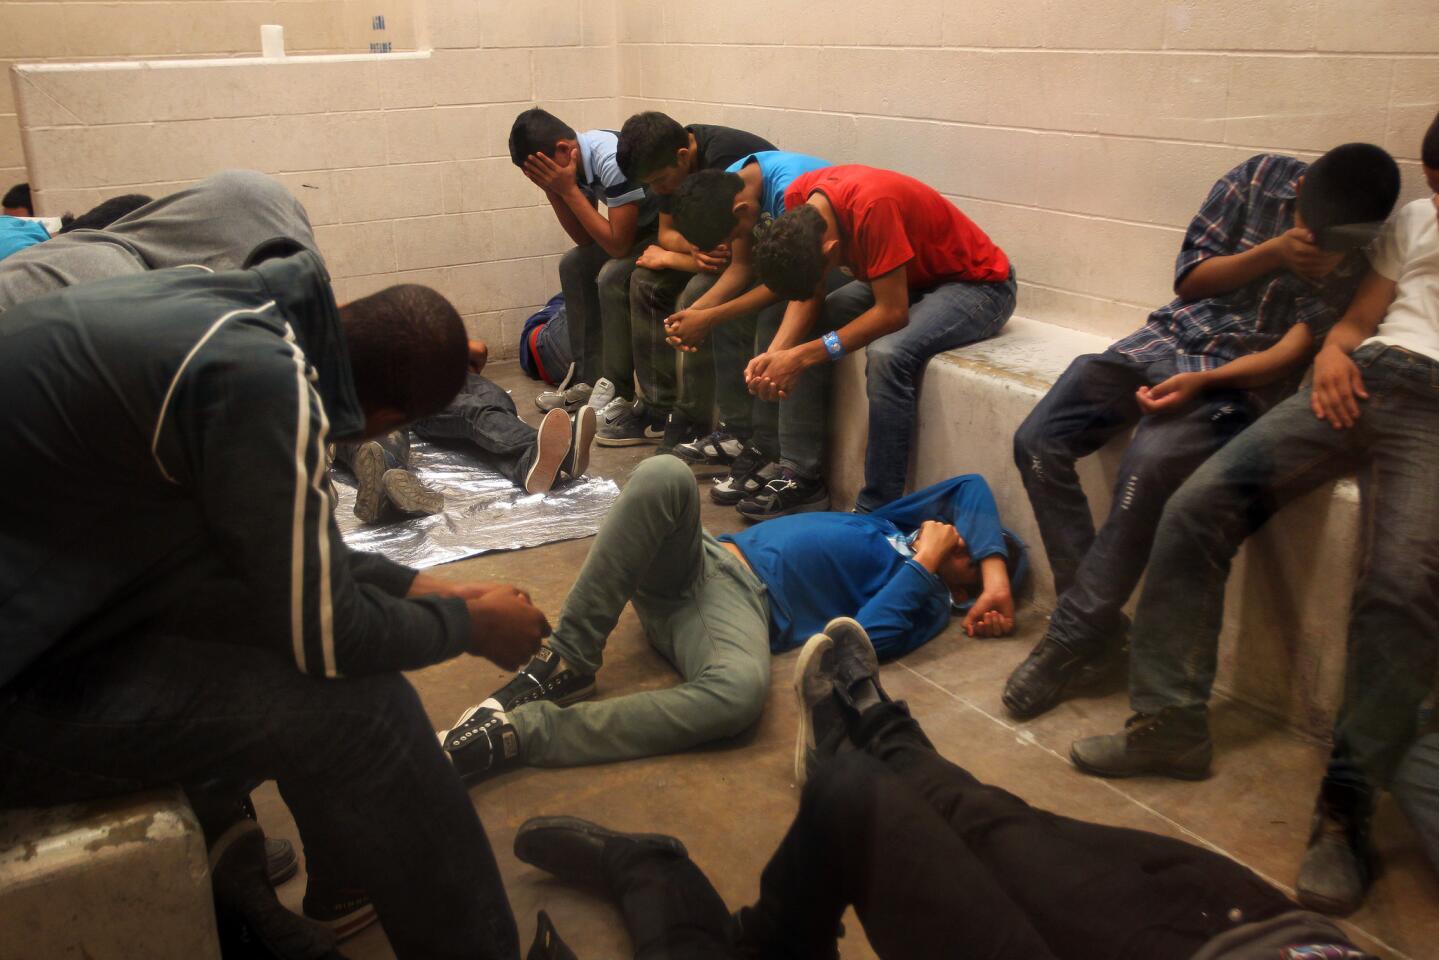 Immigrants wait to be processed at the U.S. Border Patrol station in McAllen, Texas. More than 350 detainees - men and women, infants and children - were being held there Tuesday.